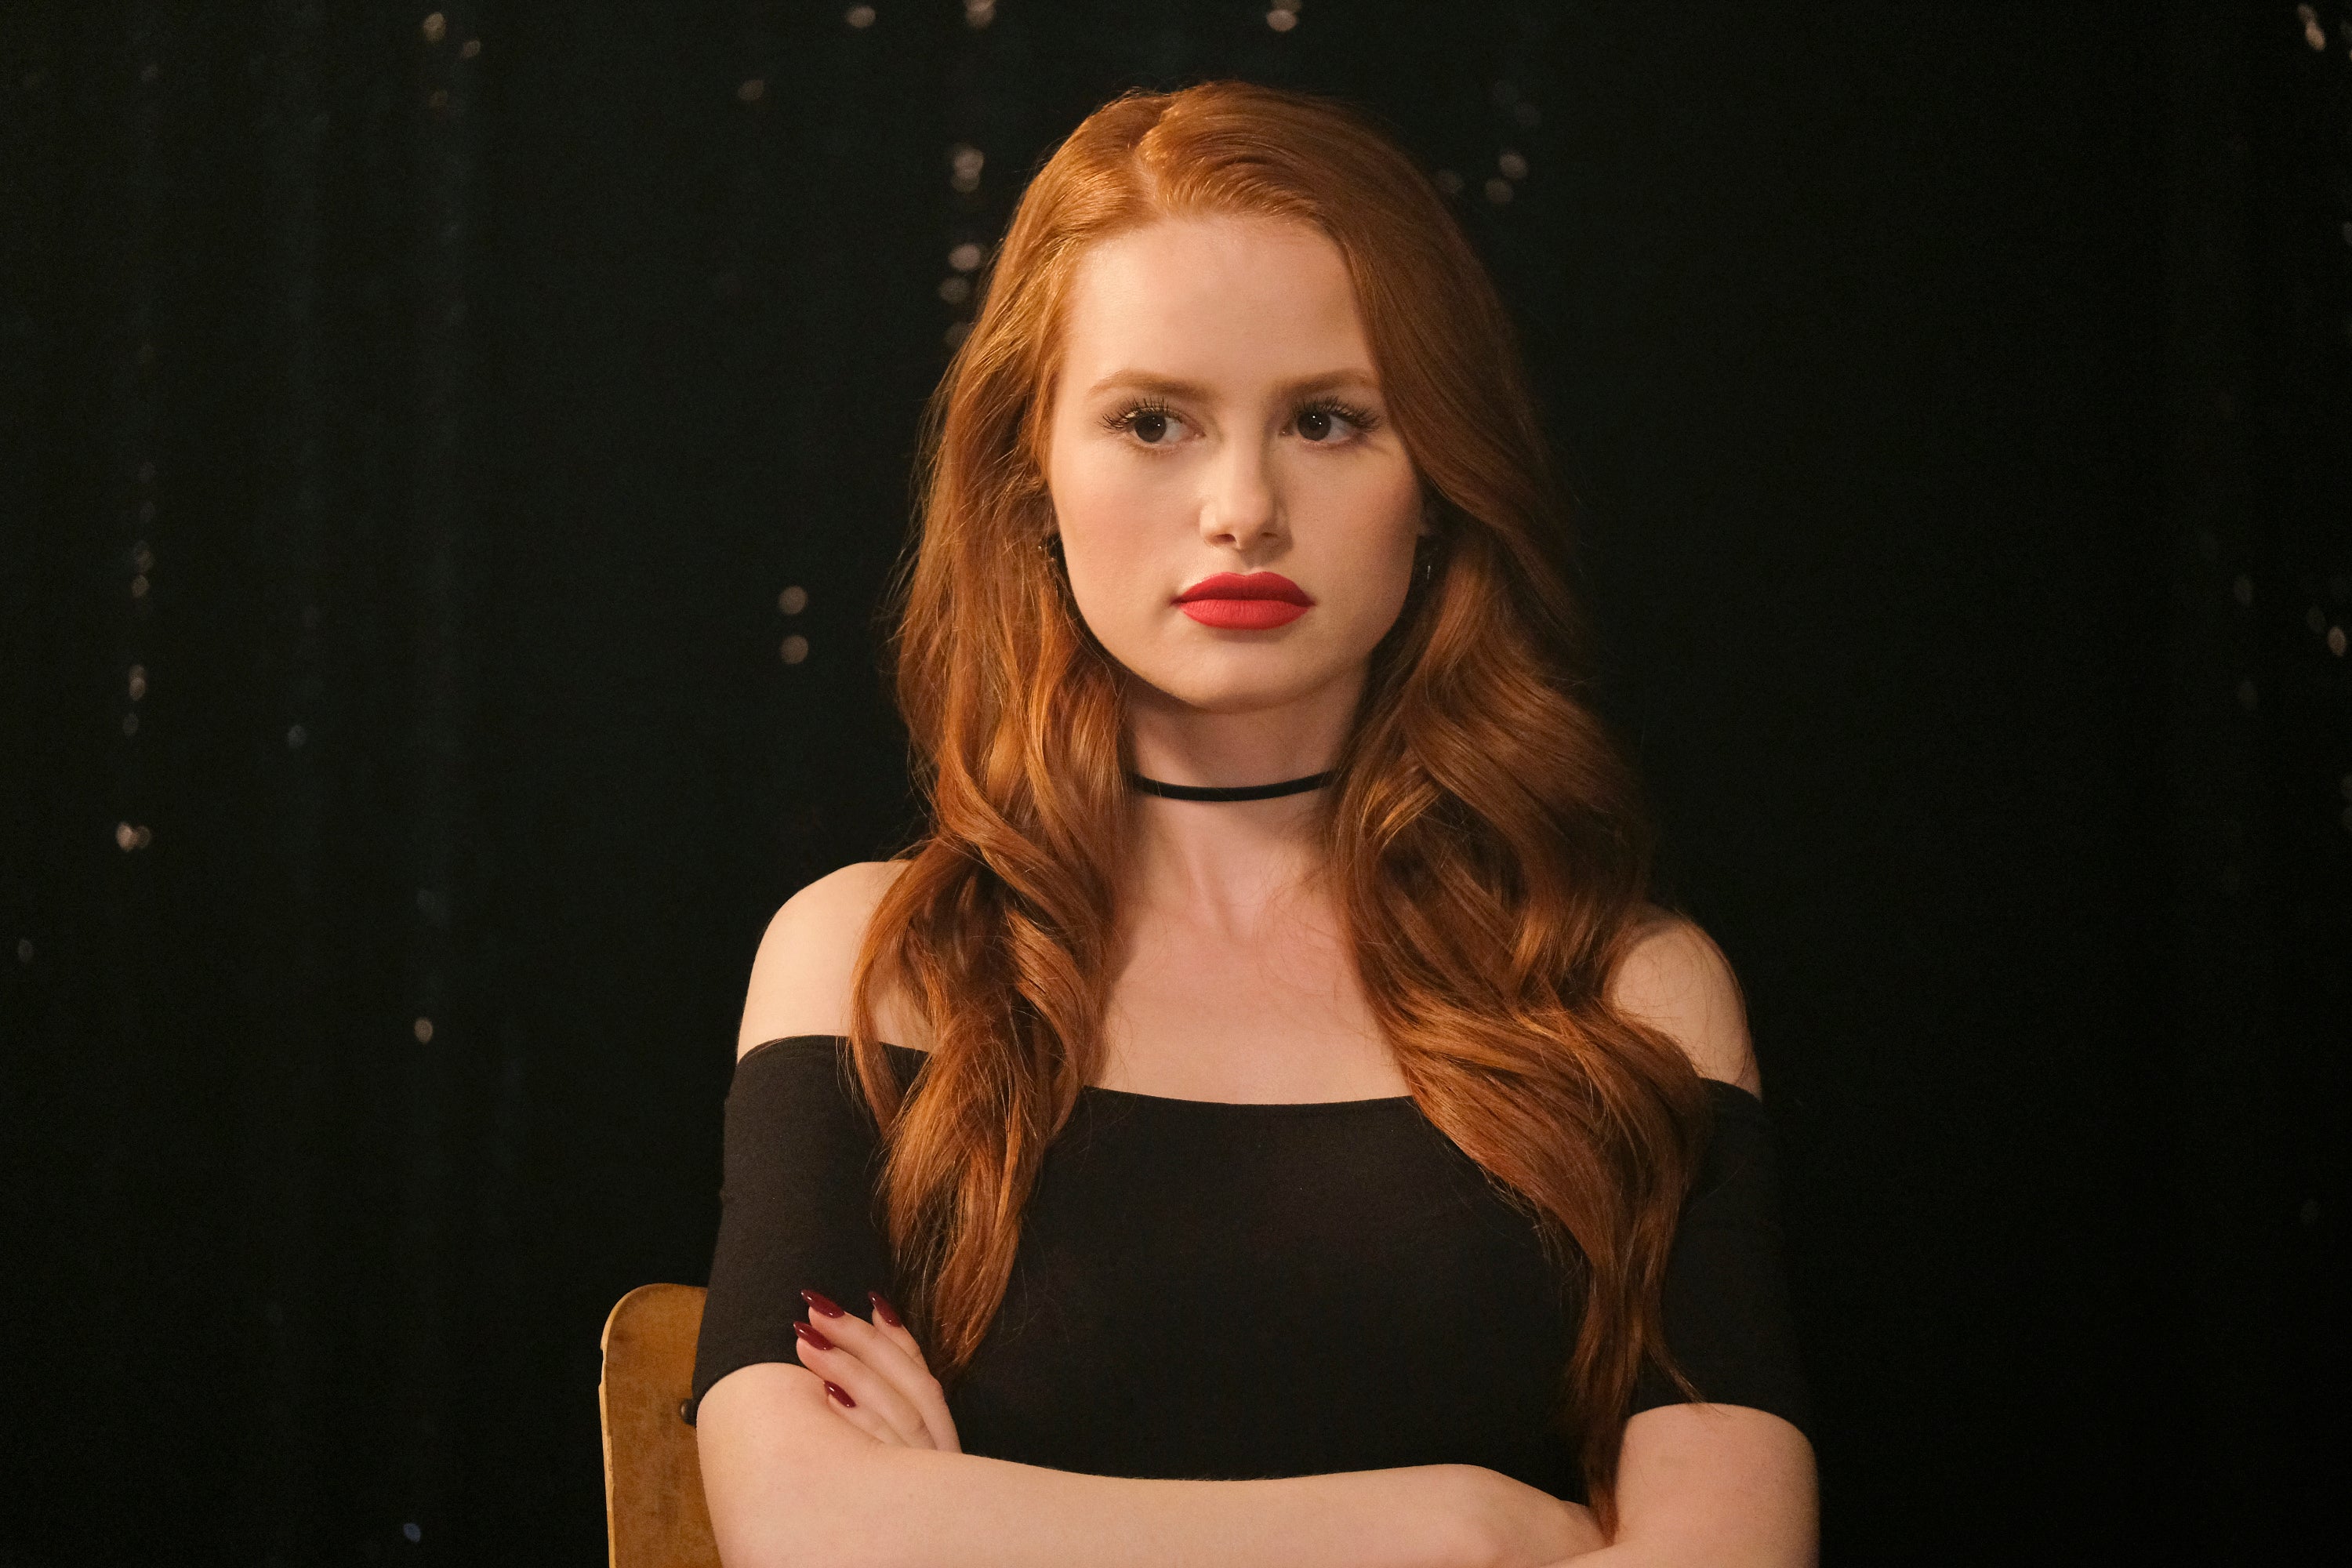 Madelaine Petsch, Travis Mills Split After 3 Years of Dating